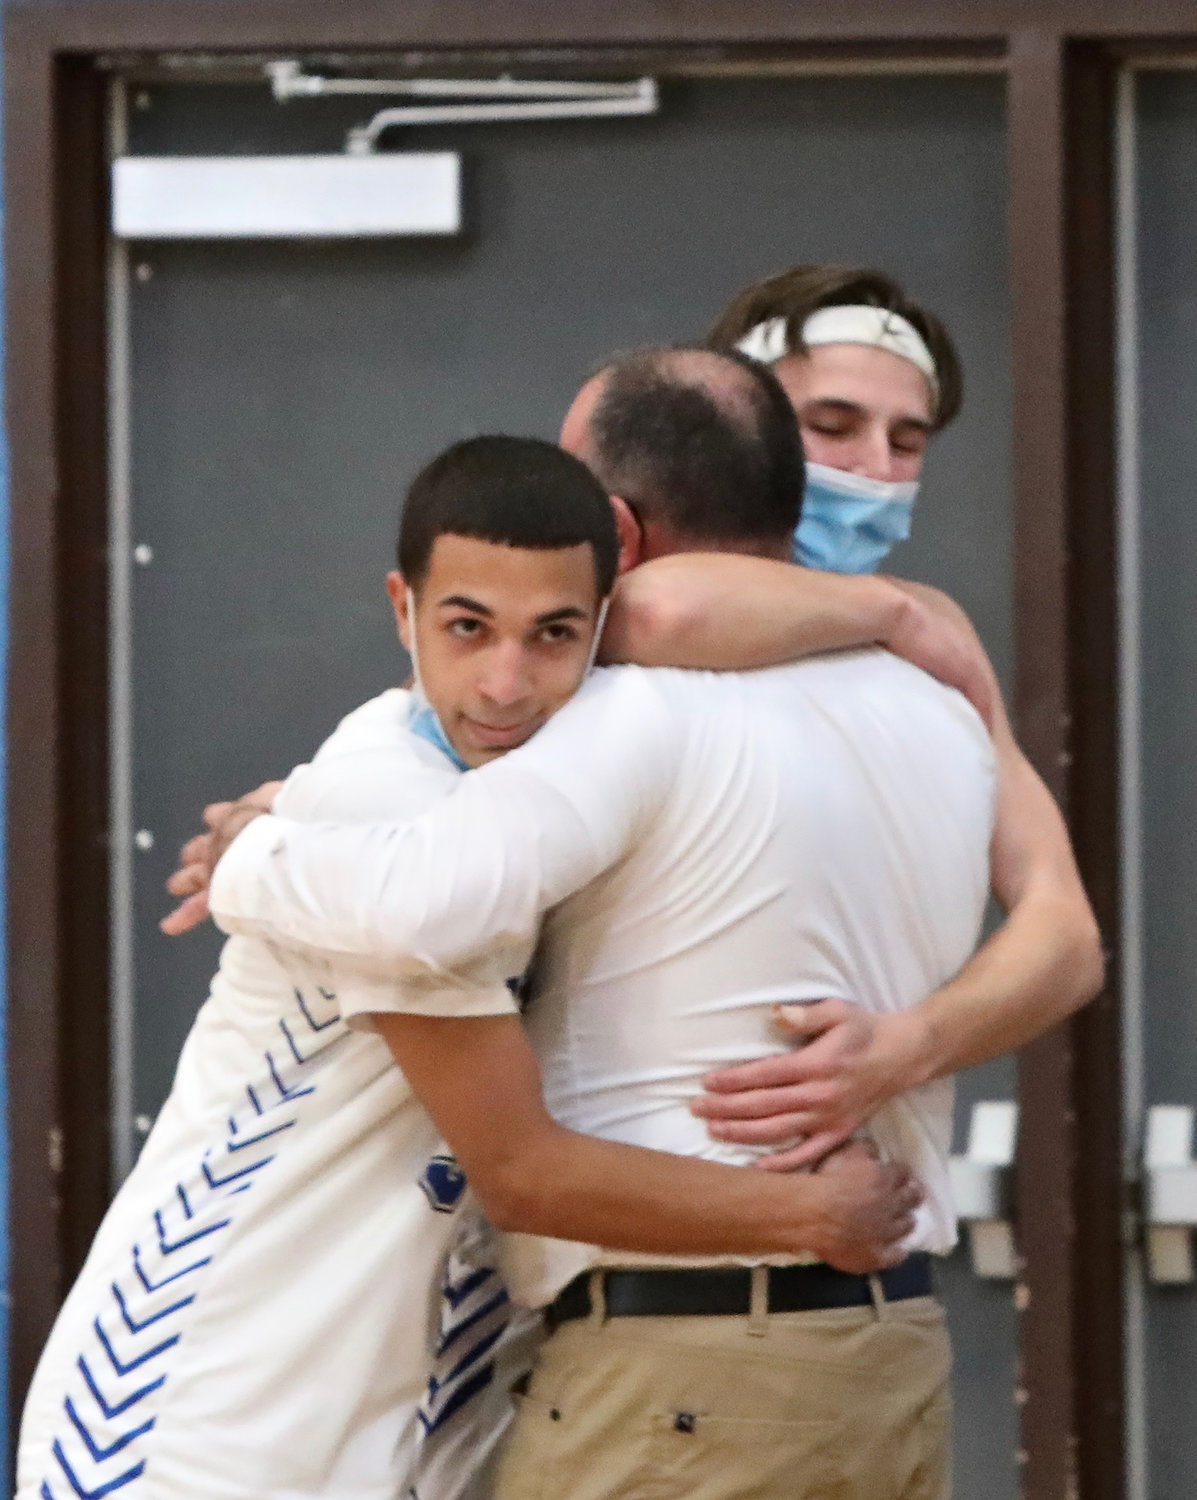 Coach Chris Russo gets an emotional hug from his son Joseph and star guard Pedro Rodriguez. Russo has such great rapport with his players who respect him immensely. Making it to sectionals was a season-long goal.